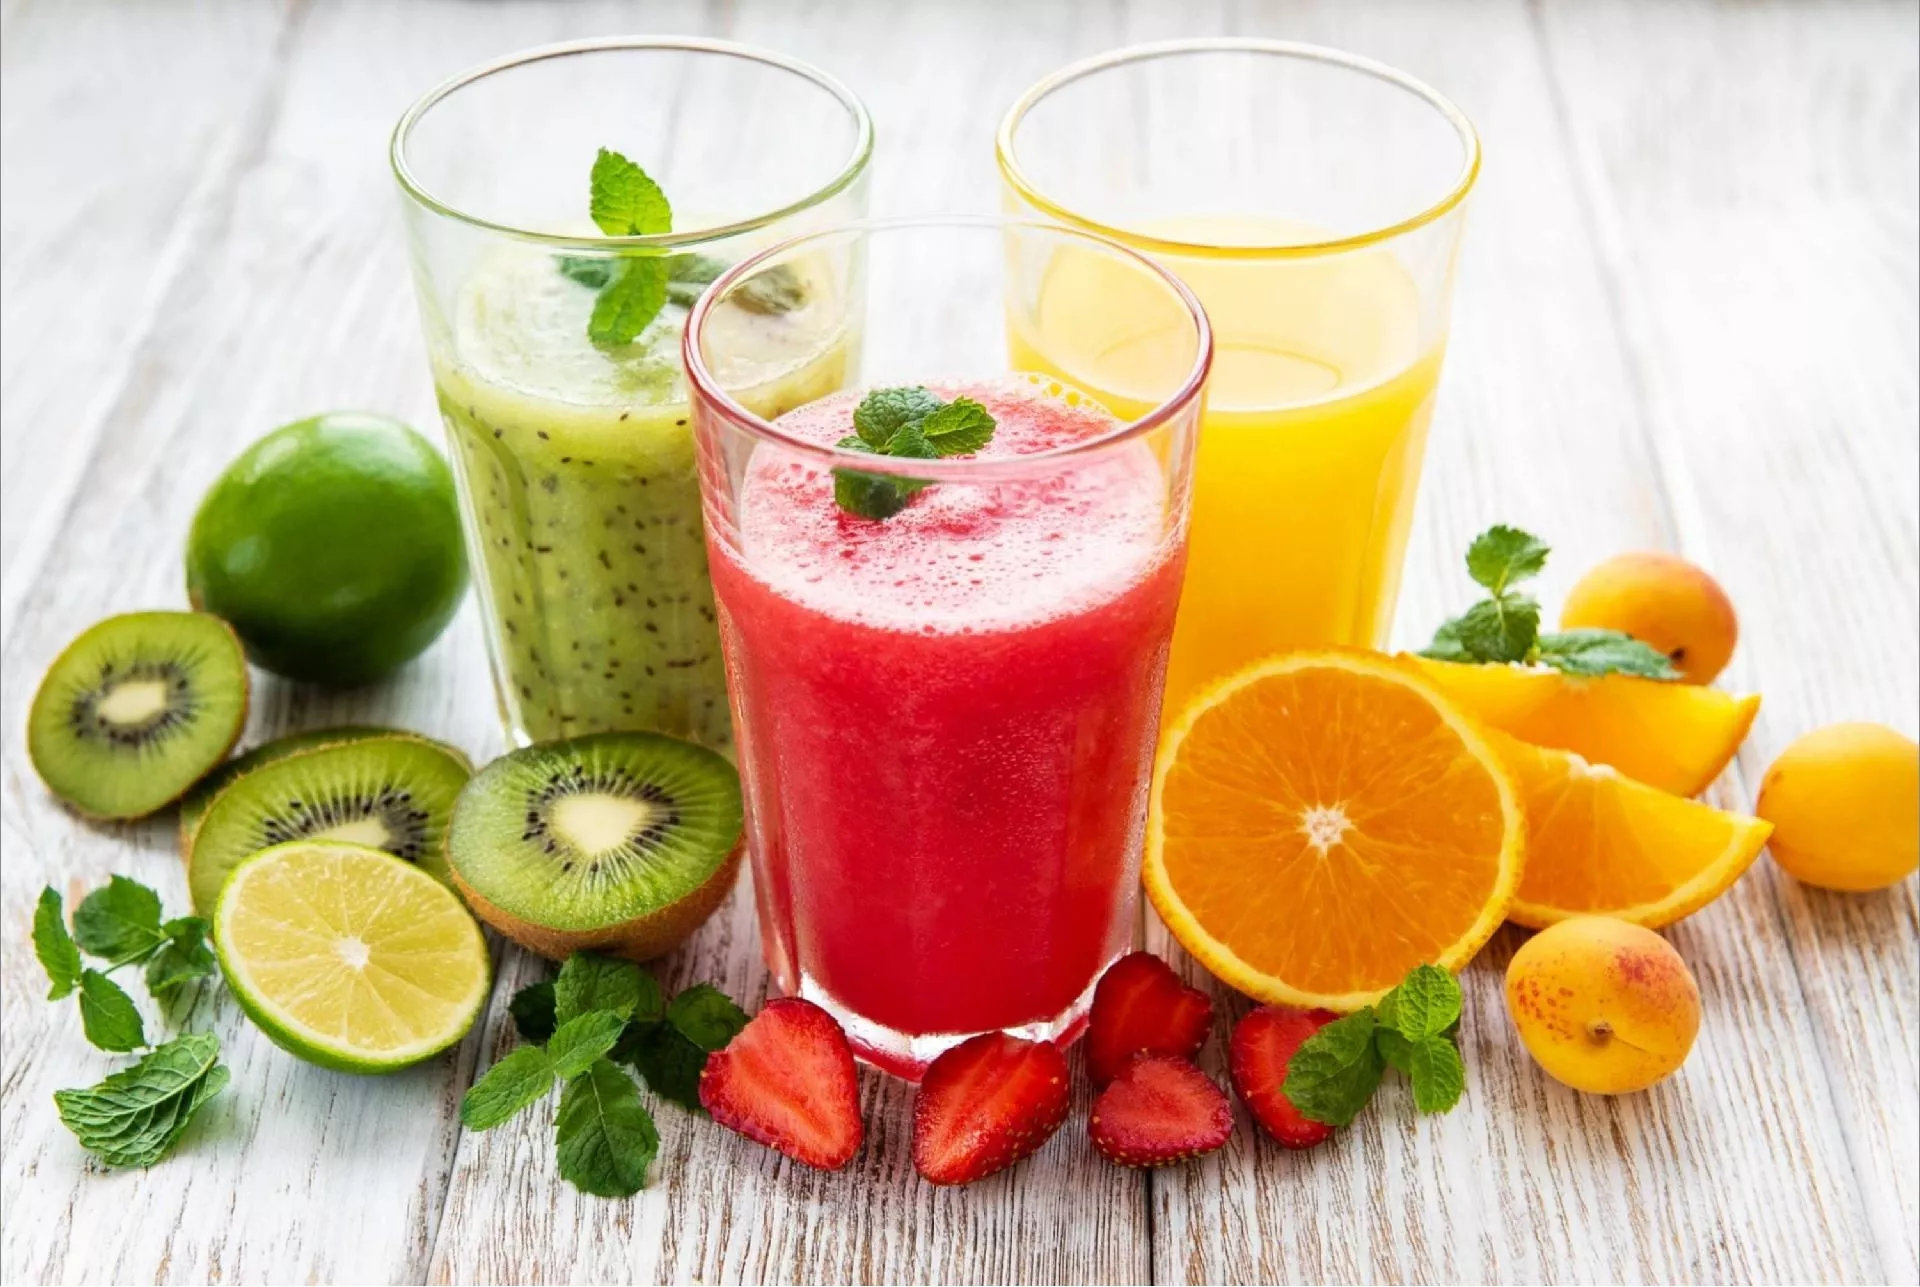 Five Tips for Choosing the Healthiest Juices